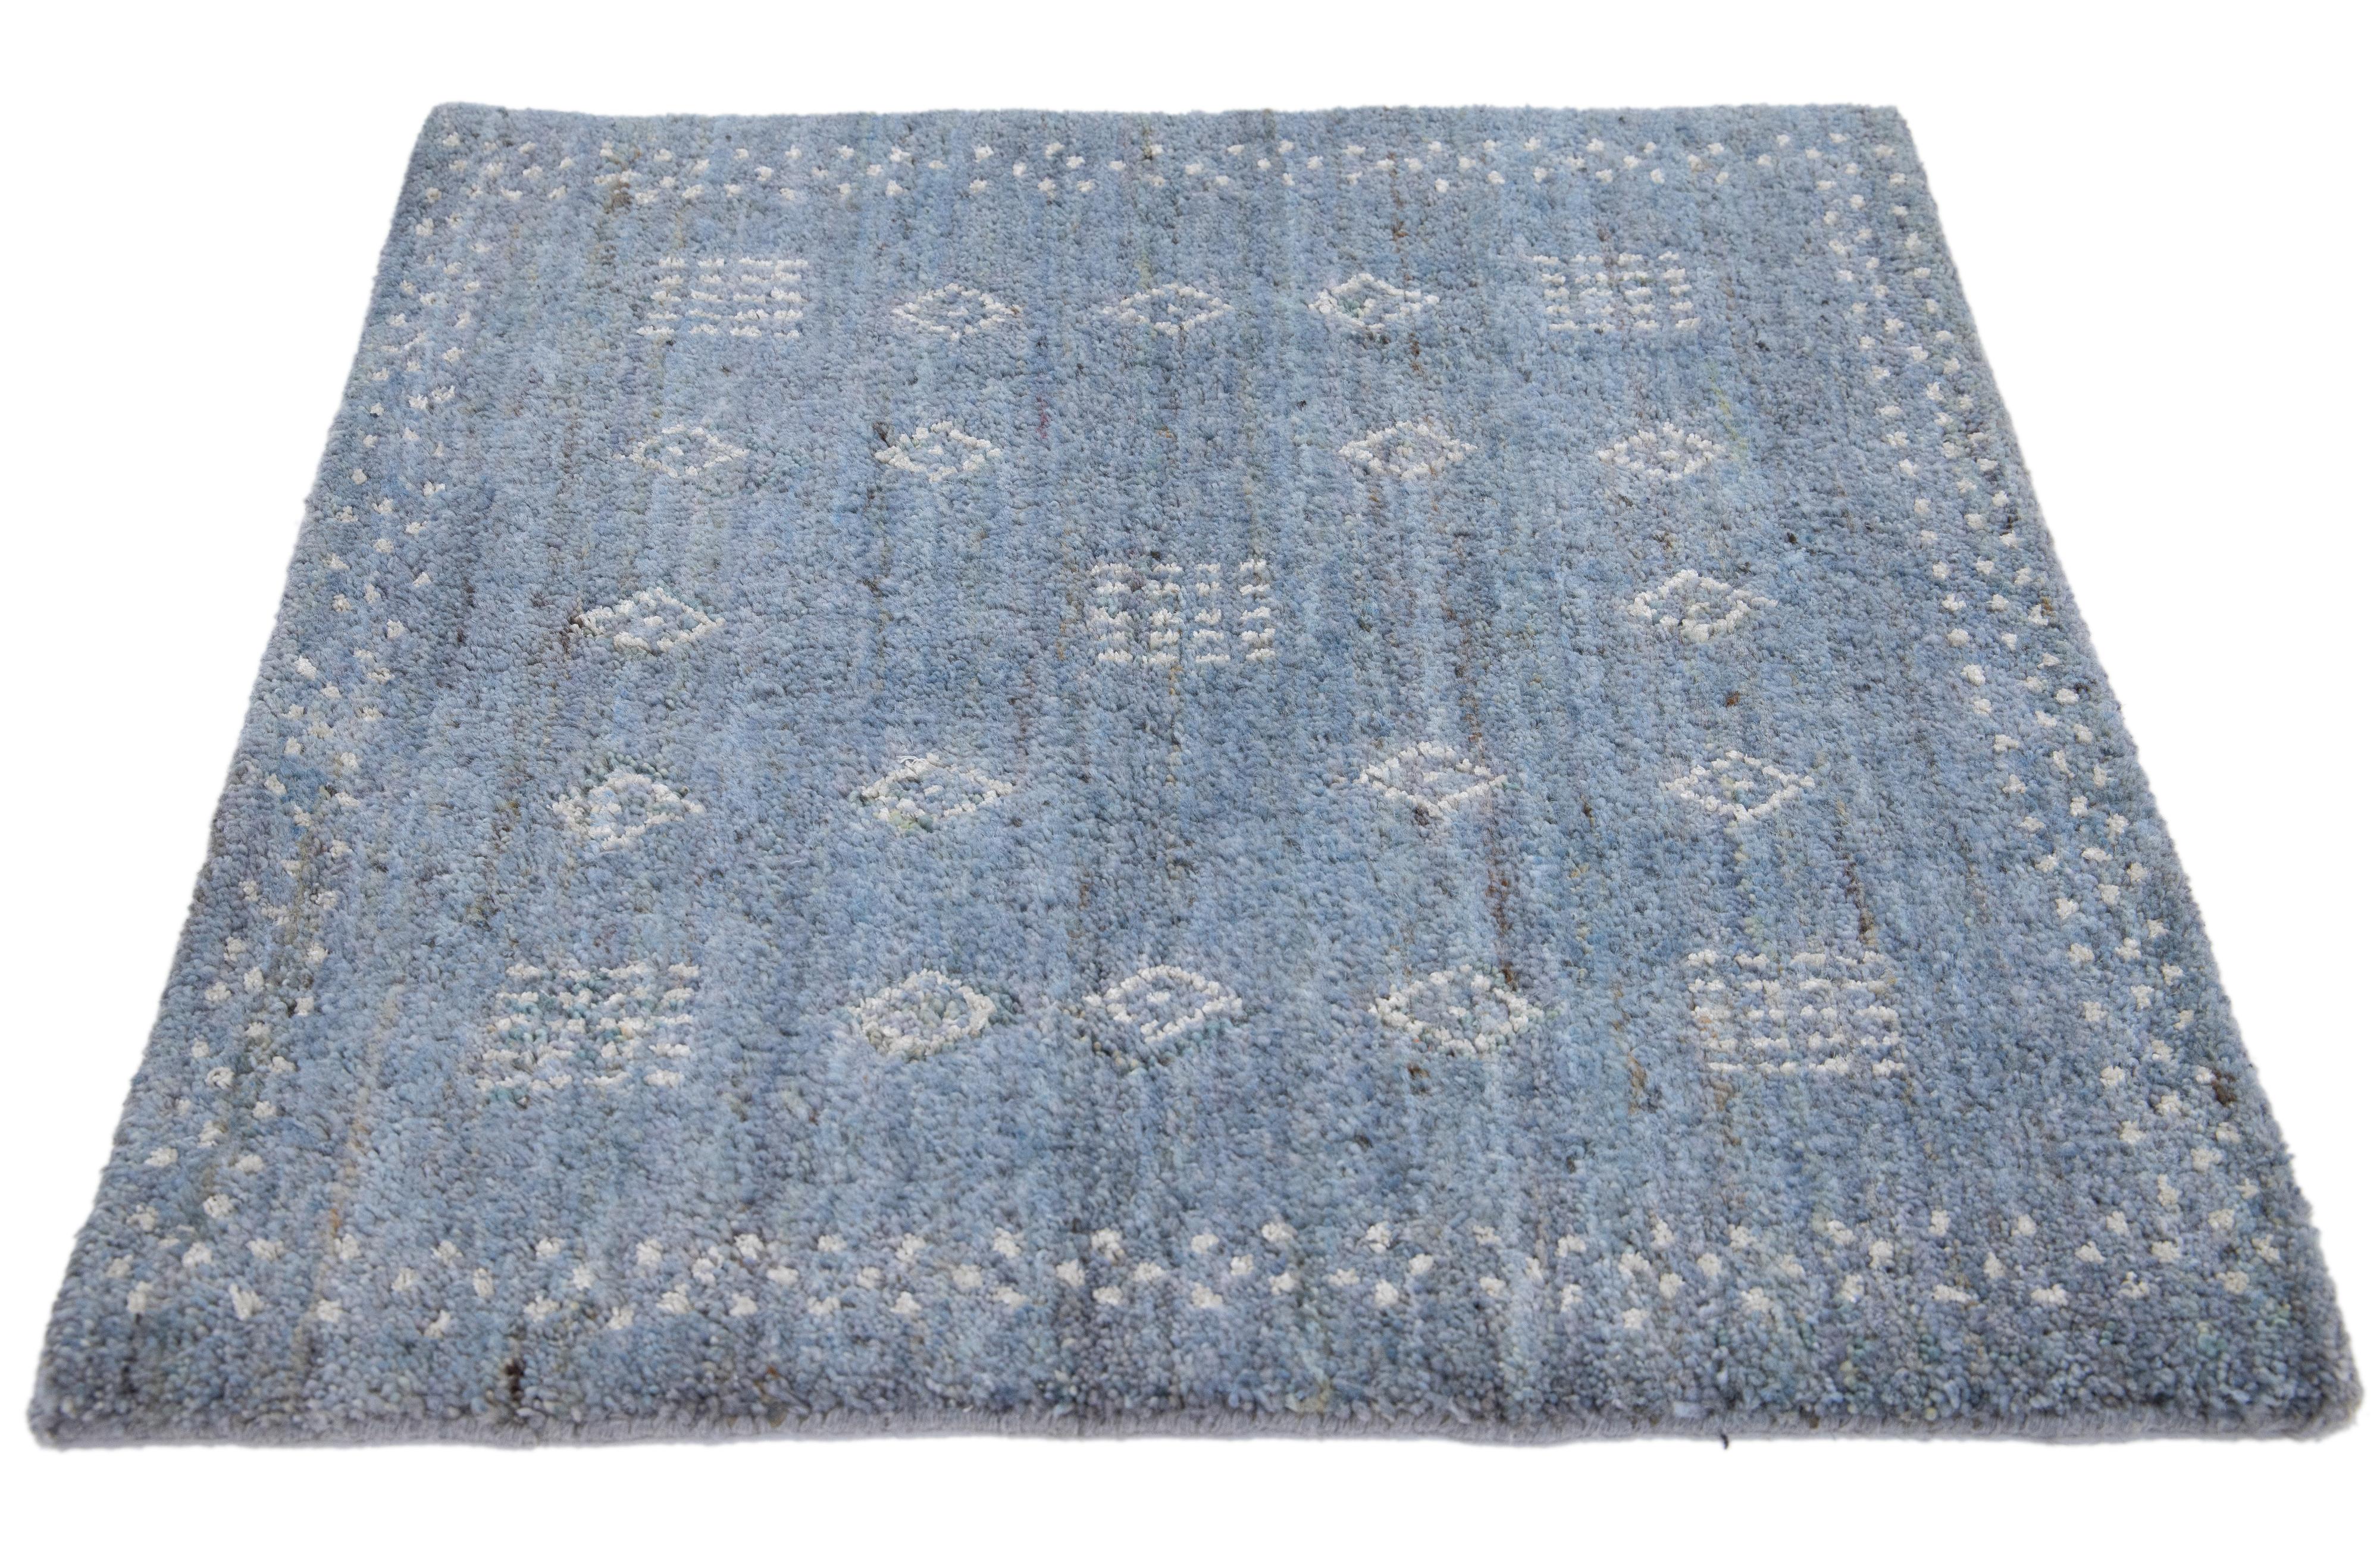 Apadana's Modern Gabbeh style wool custom rug. Custom sizes and colors made-to-order. 

Material: Wool 
Techniques: Hand-Loom
Style: Gabbeh style
Lead time: Approx. 15-16 wks available 
Colors: As shown, other custom colors are available.